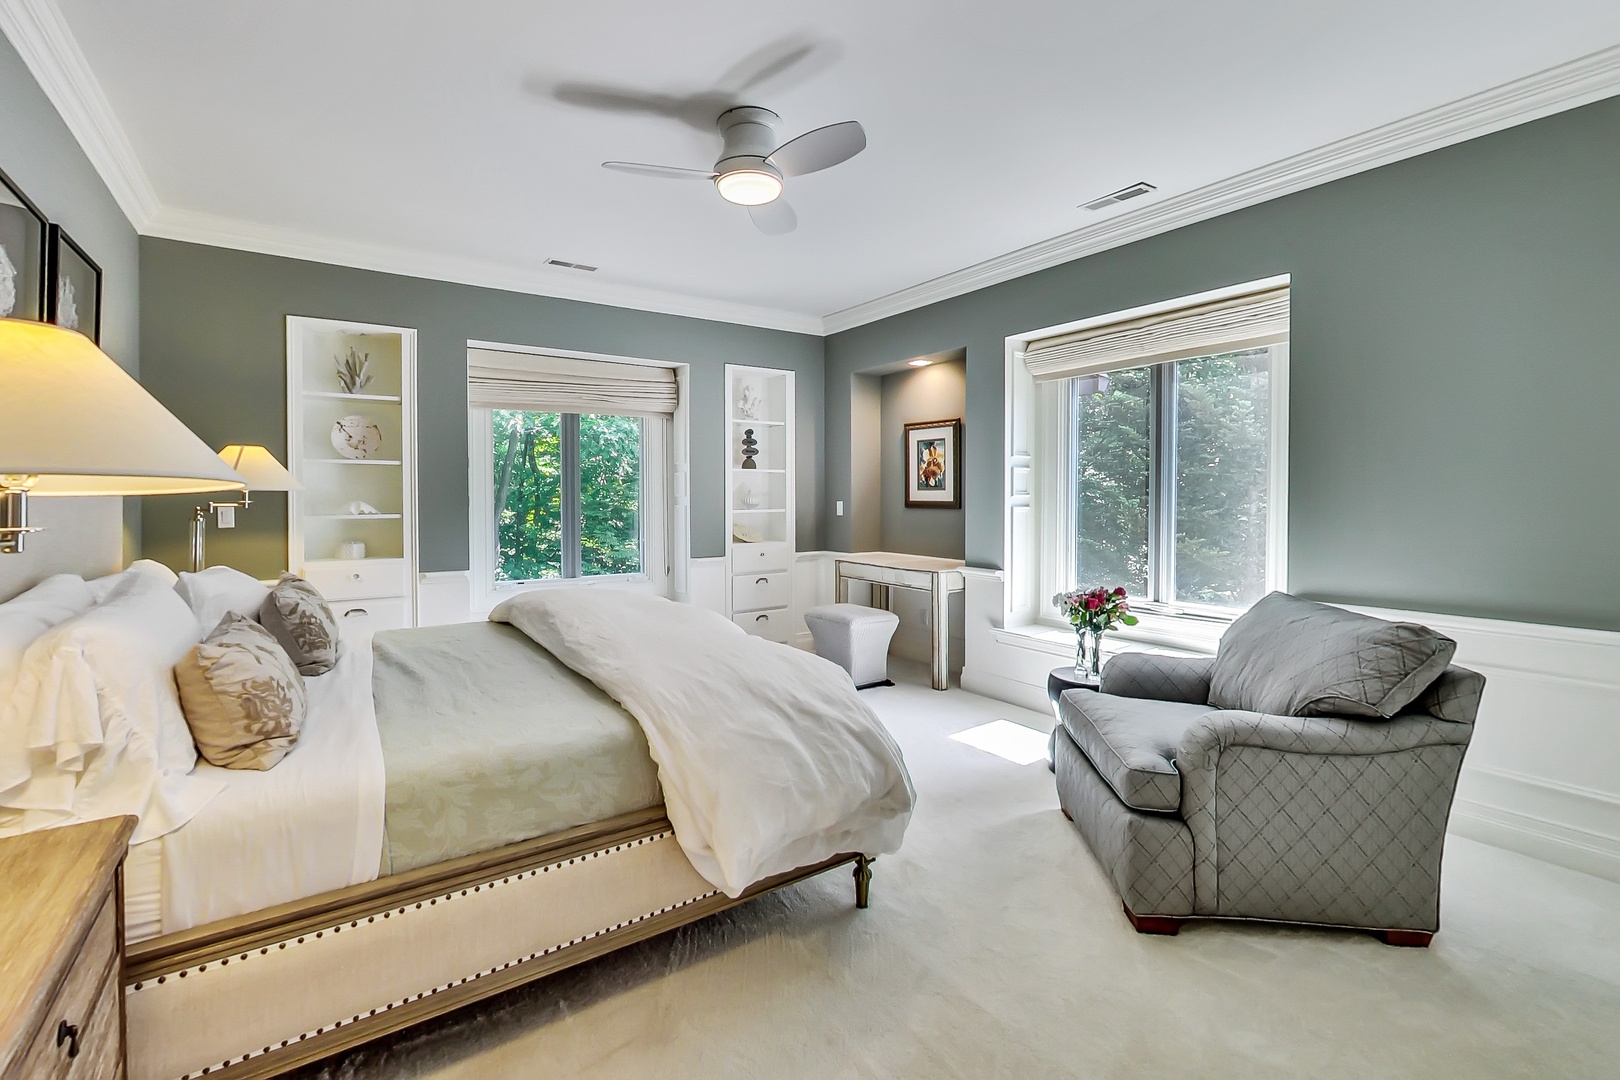 This bedroom combines classic design and all the creature comforts you need.